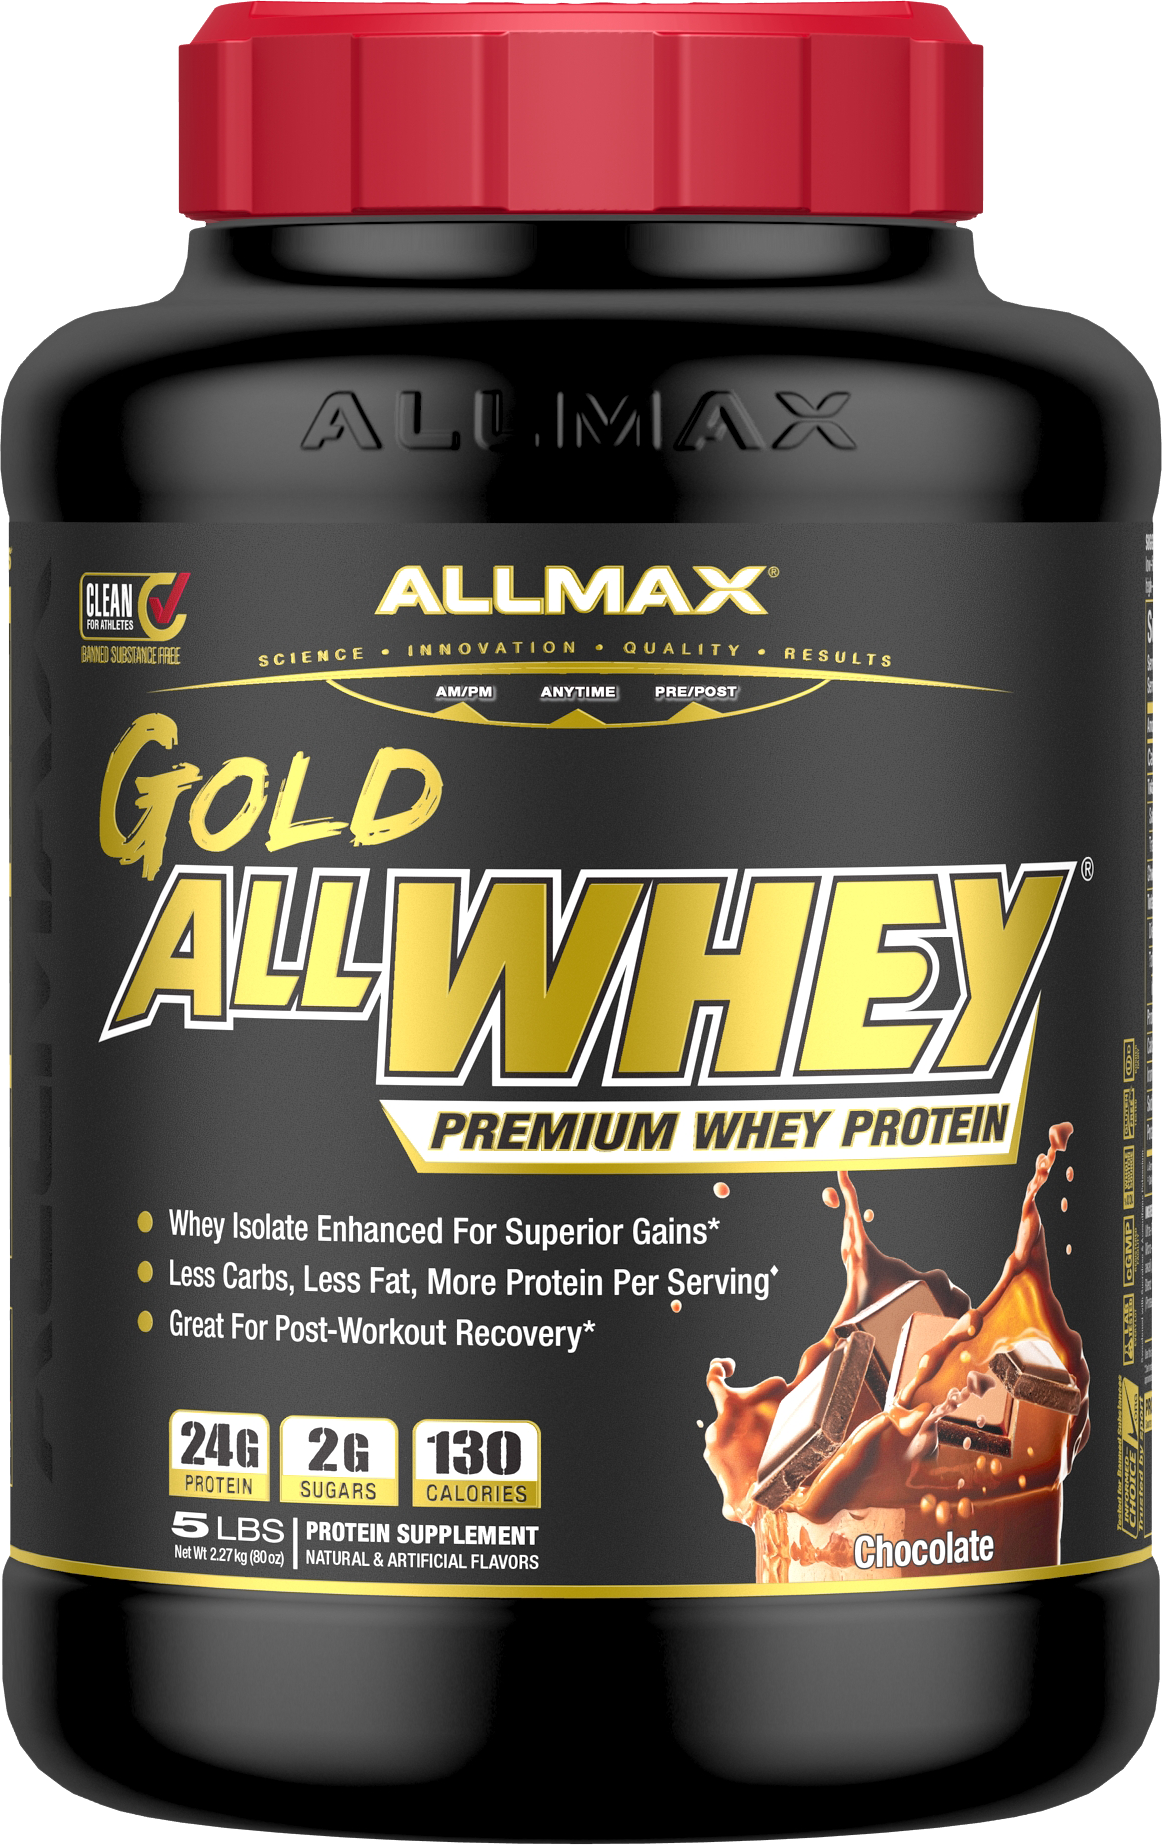 Allmax gold allwhey best buy directions